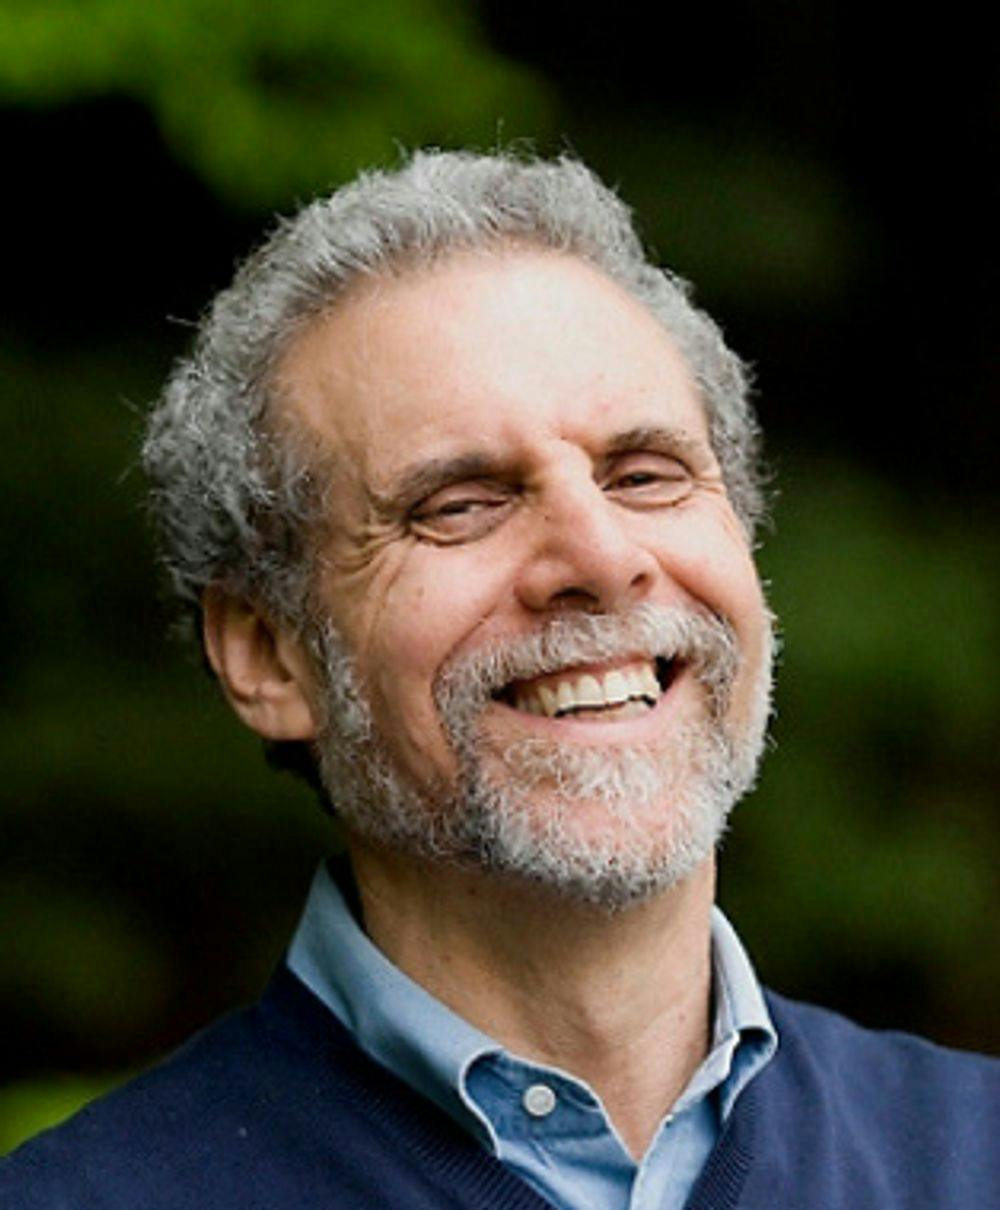 Dan Goleman - Daniel Goleman is a psychologist and science journalist and author of the best-selling book Emotional Intelligence.